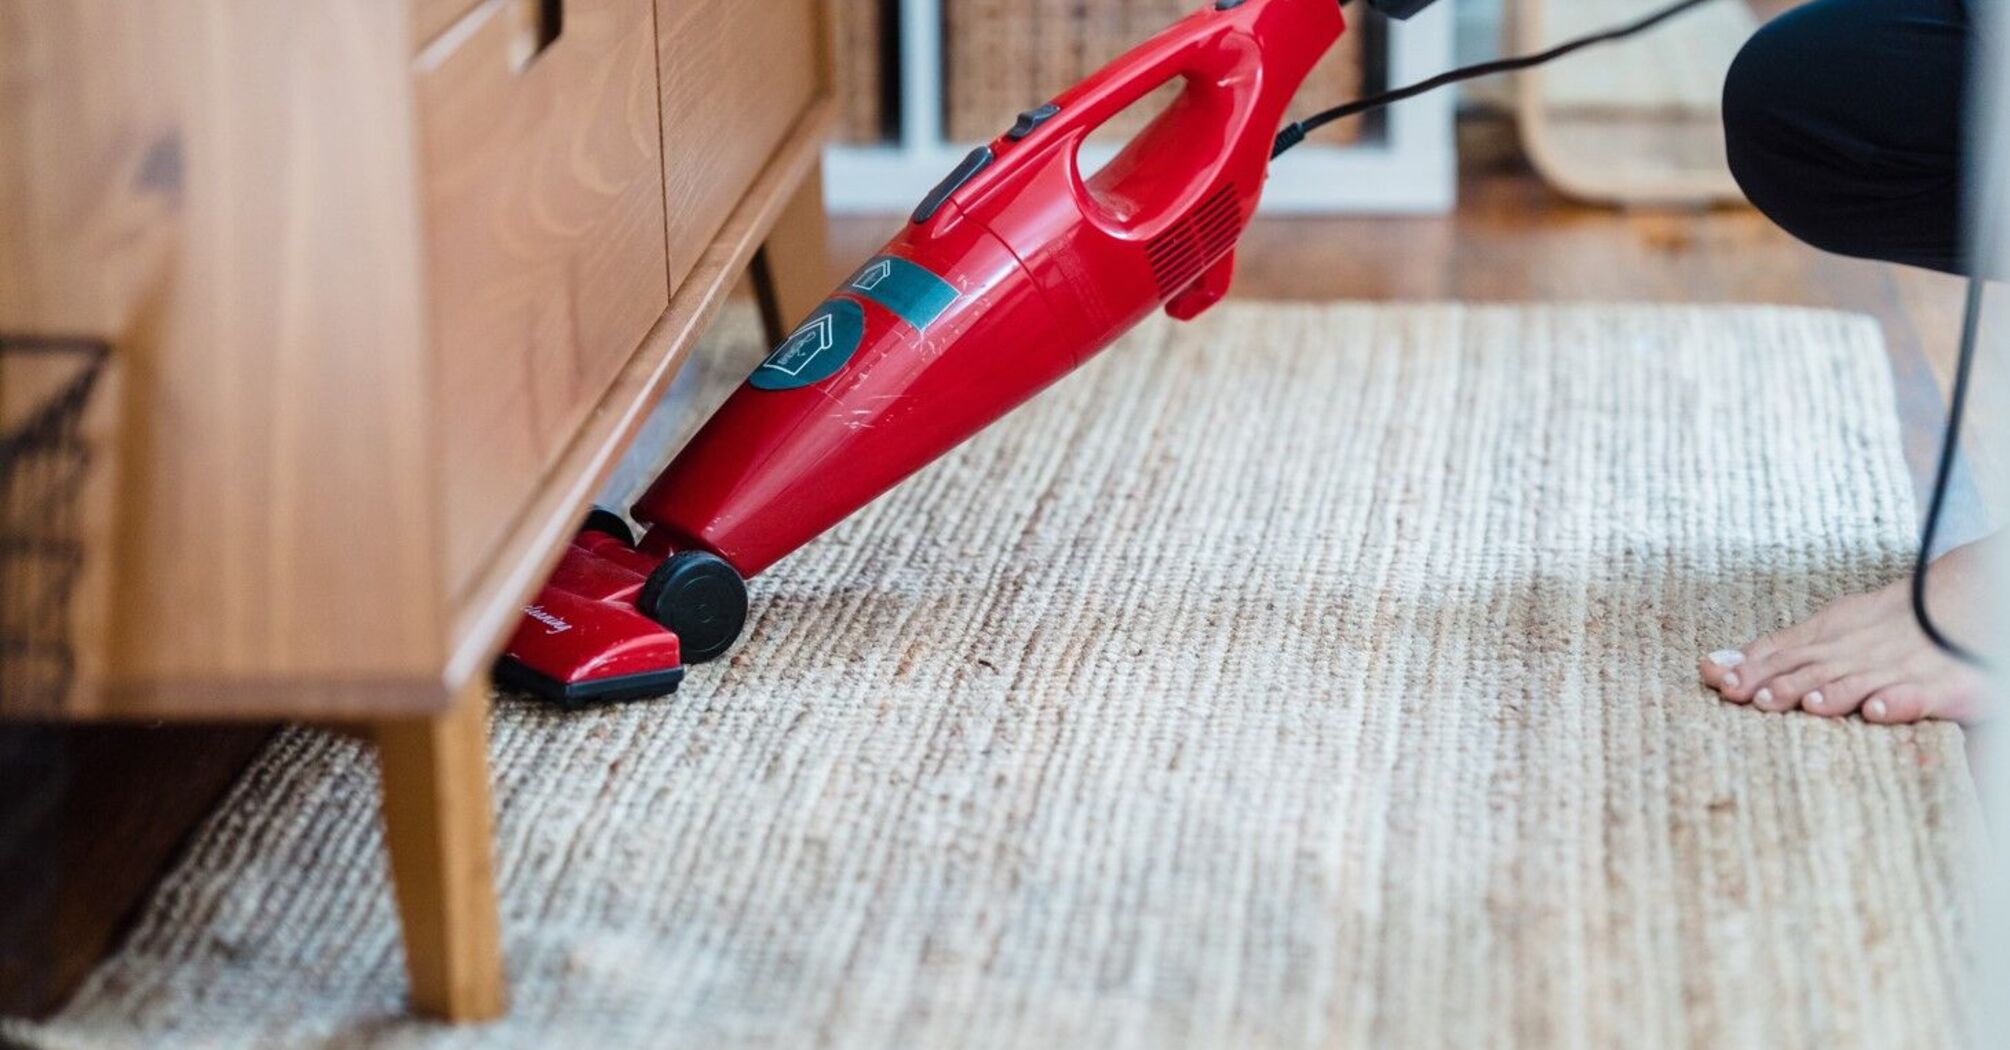 How to get rid of unpleasant odors from a vacuum cleaner